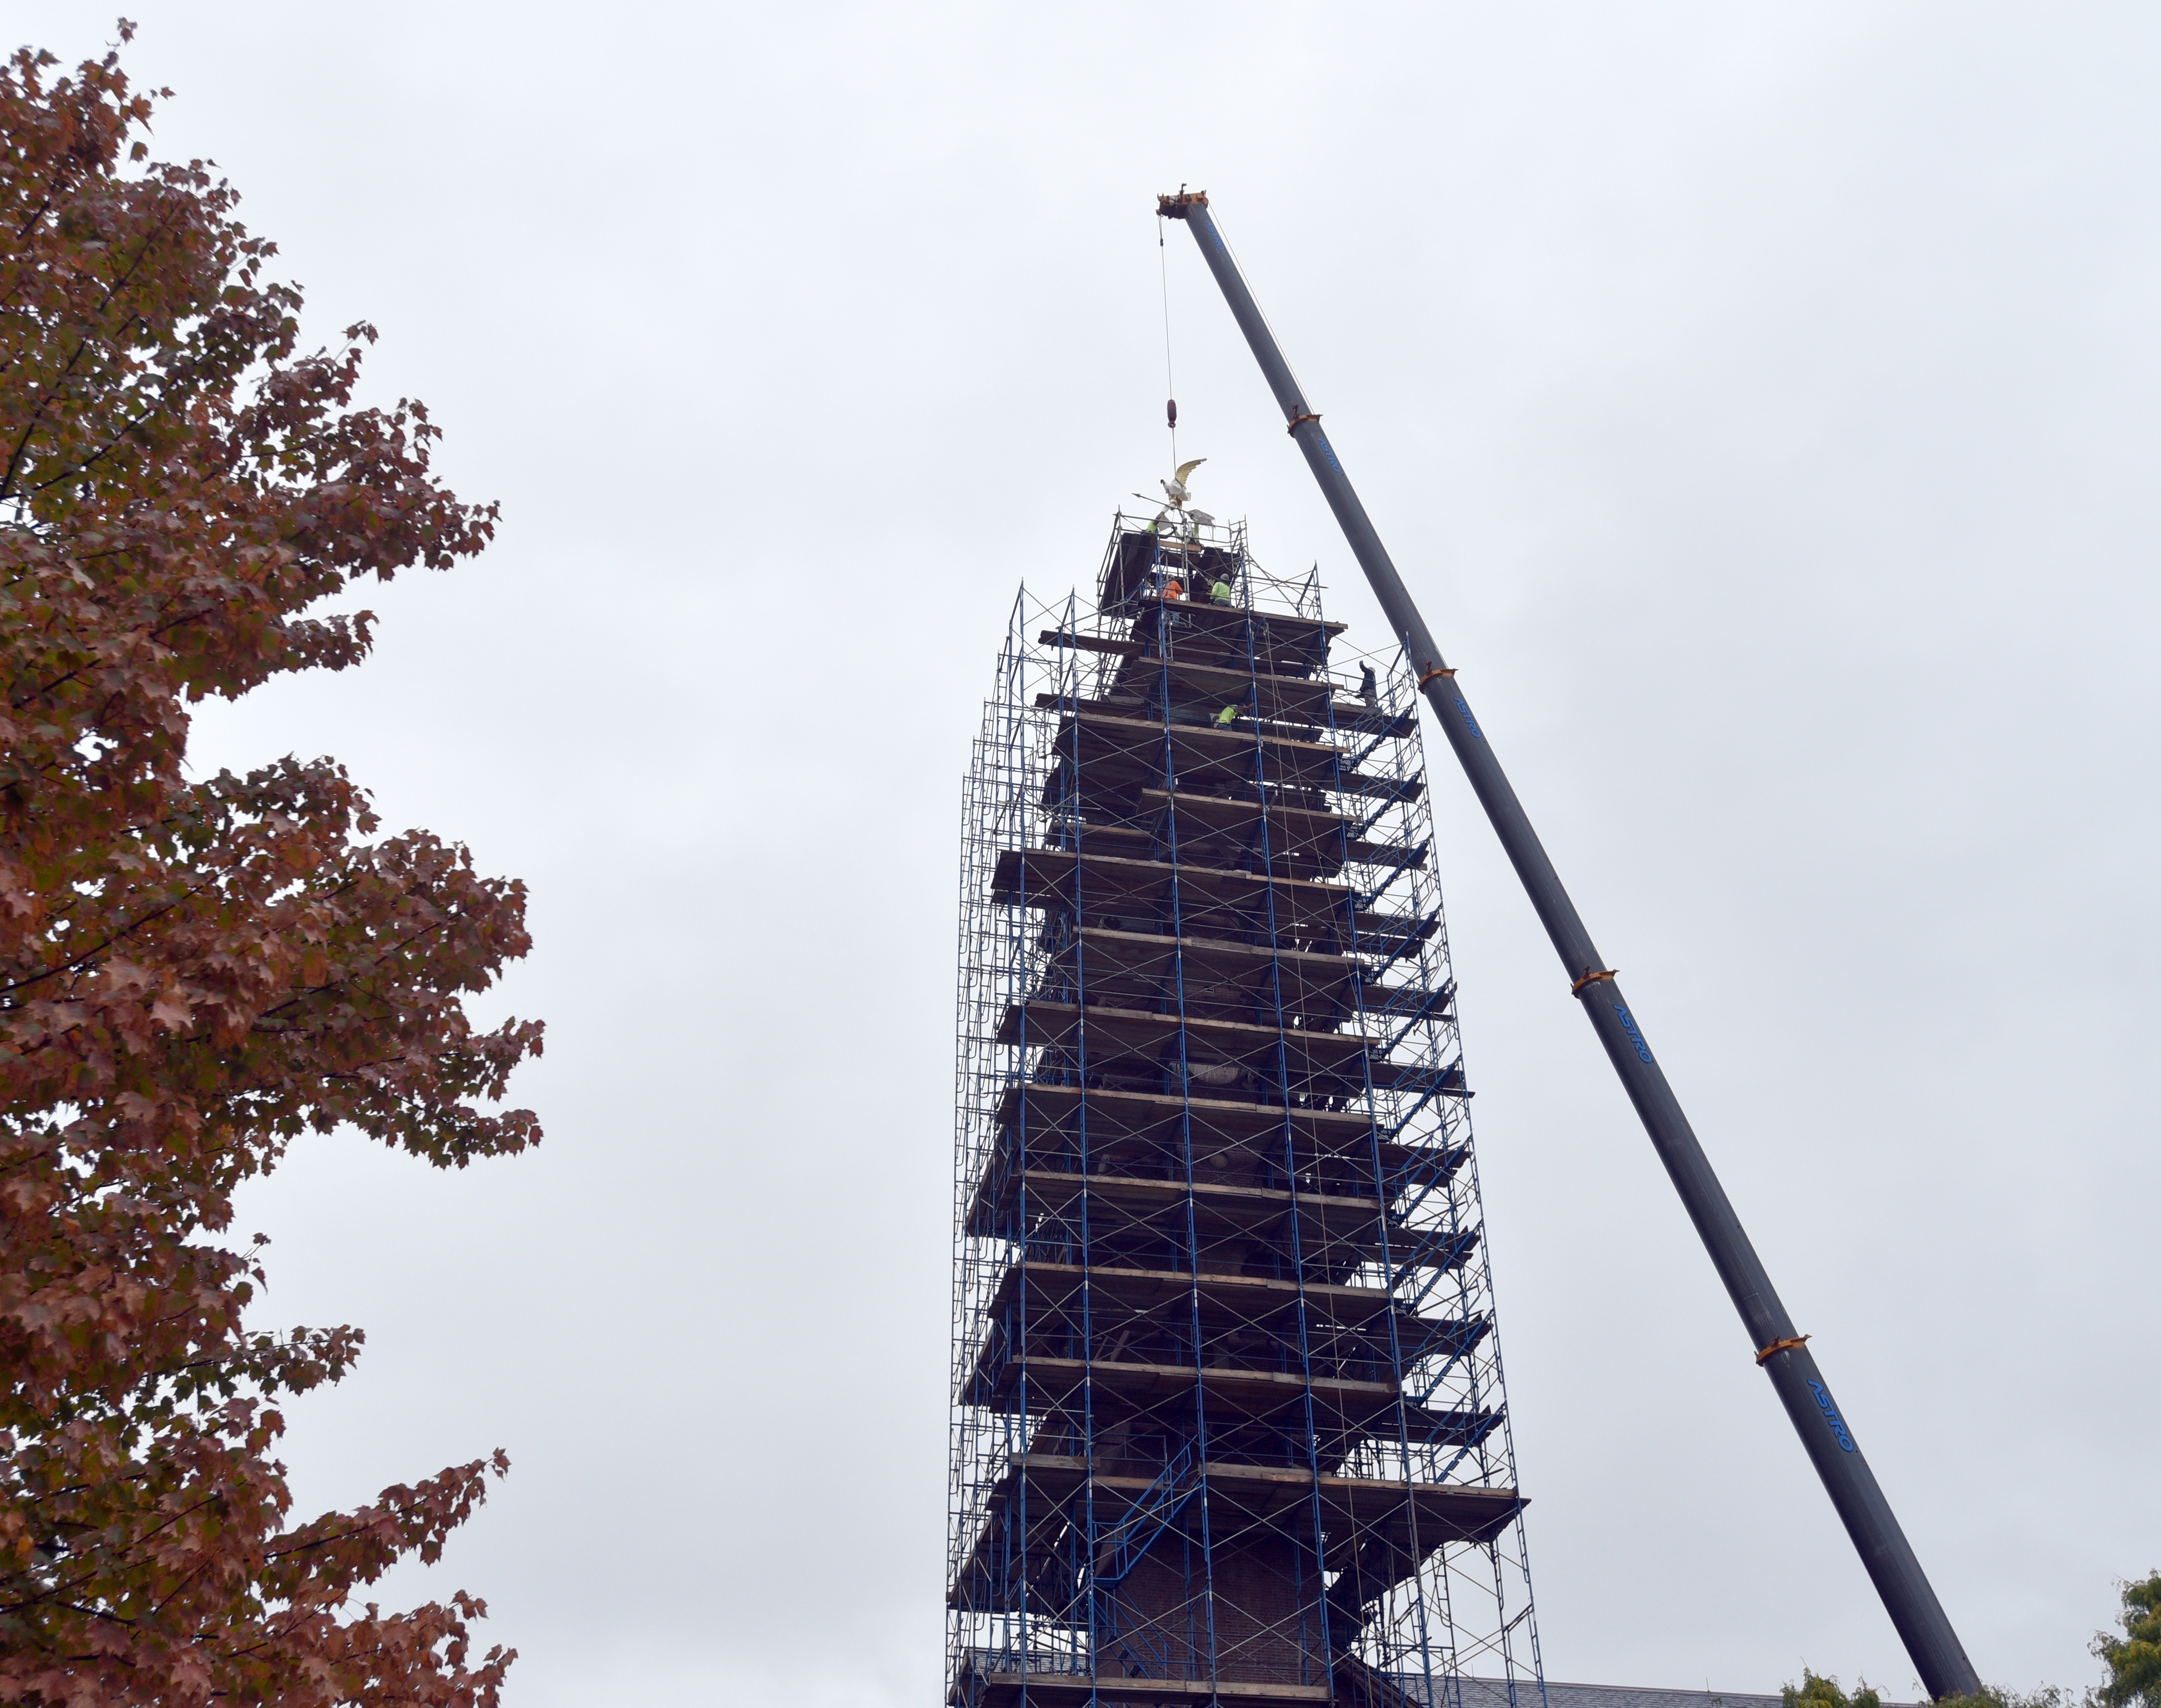 10/6/2020 -Chicopee-   A replica of  the "Chicopee Eagle Weathervane" is placed on top of the City Hall Clock Tower, now undergoing renovations. The original eagle will be on display in the City Hall auditorium once building renovations are complete.   (Don Treeger / The Republican)